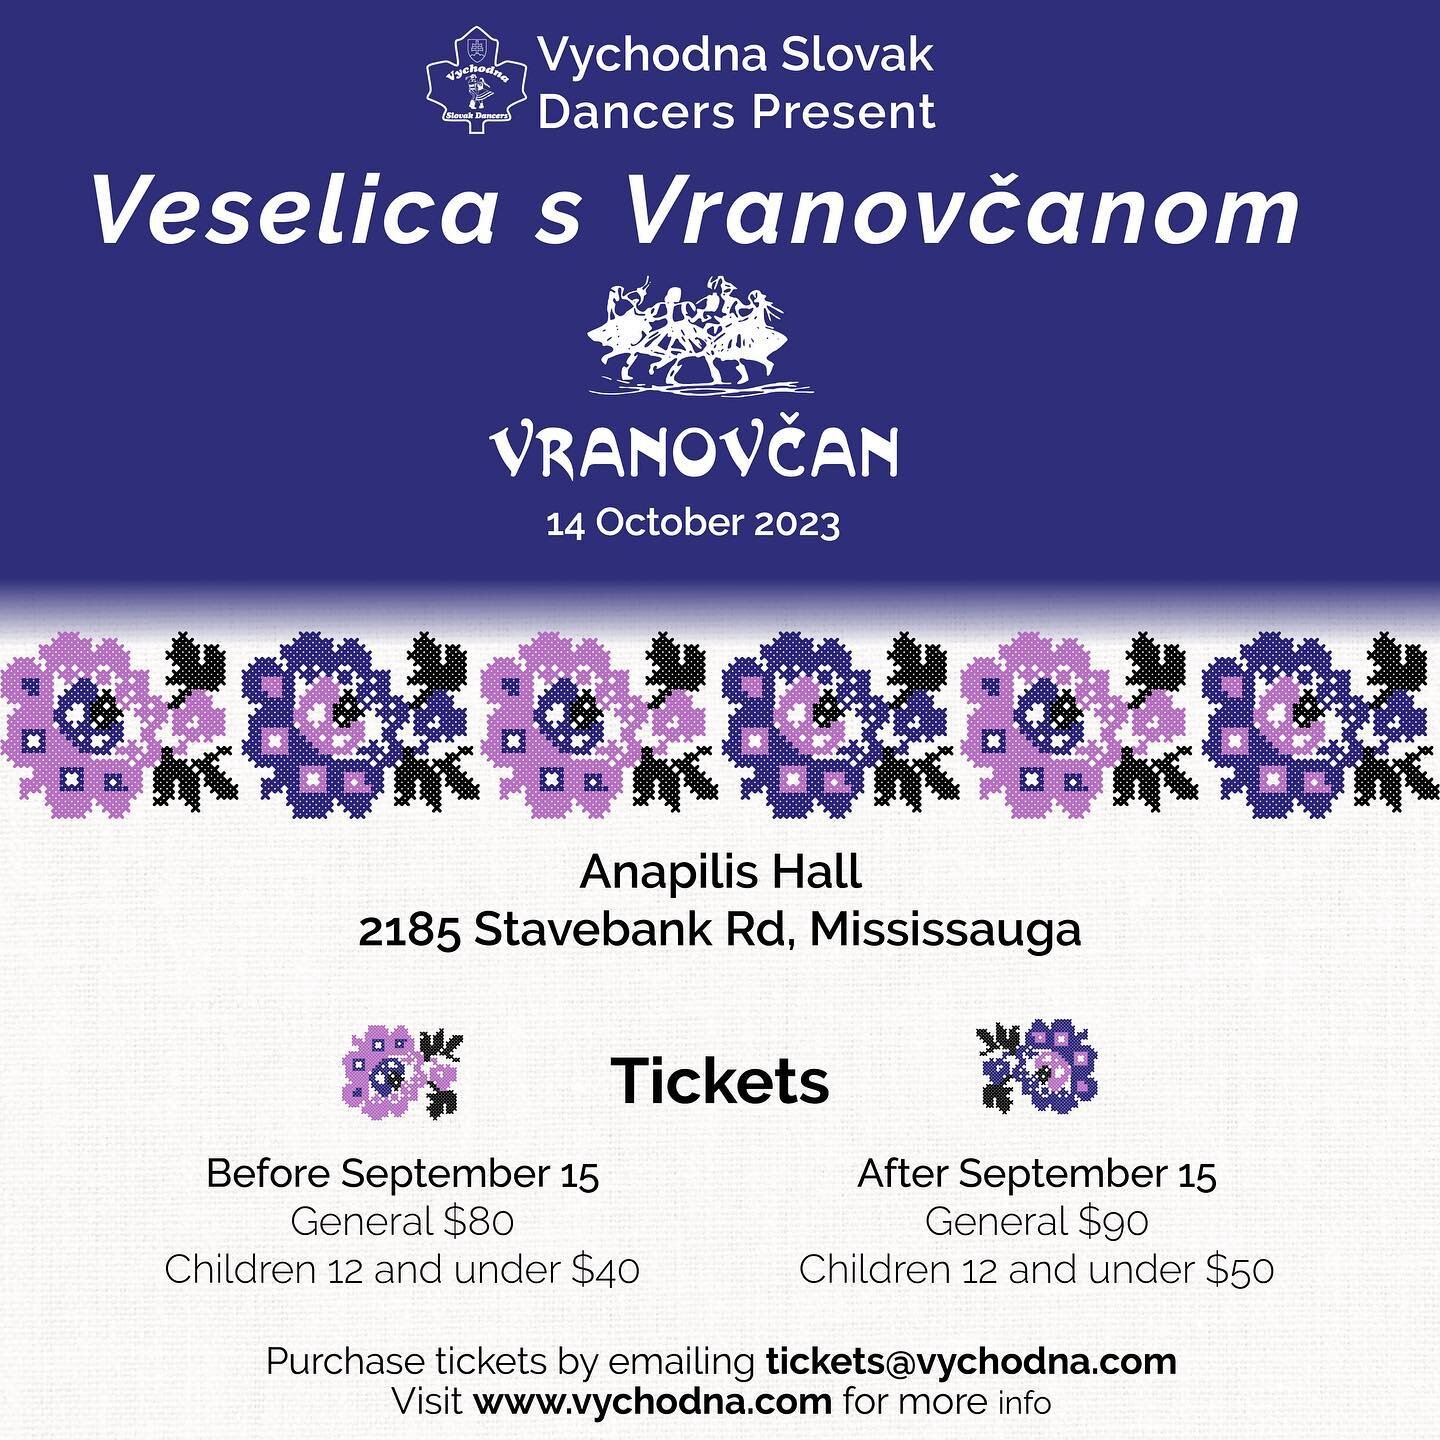 Join us this October as we host @vranovcan in Mississauga. The evening will include a performance, dinner and a party, dancing to folklore songs and the DD band 💃🕺🇸🇰

Check out the details in the post and email us at tickets@vychodna.com for tick